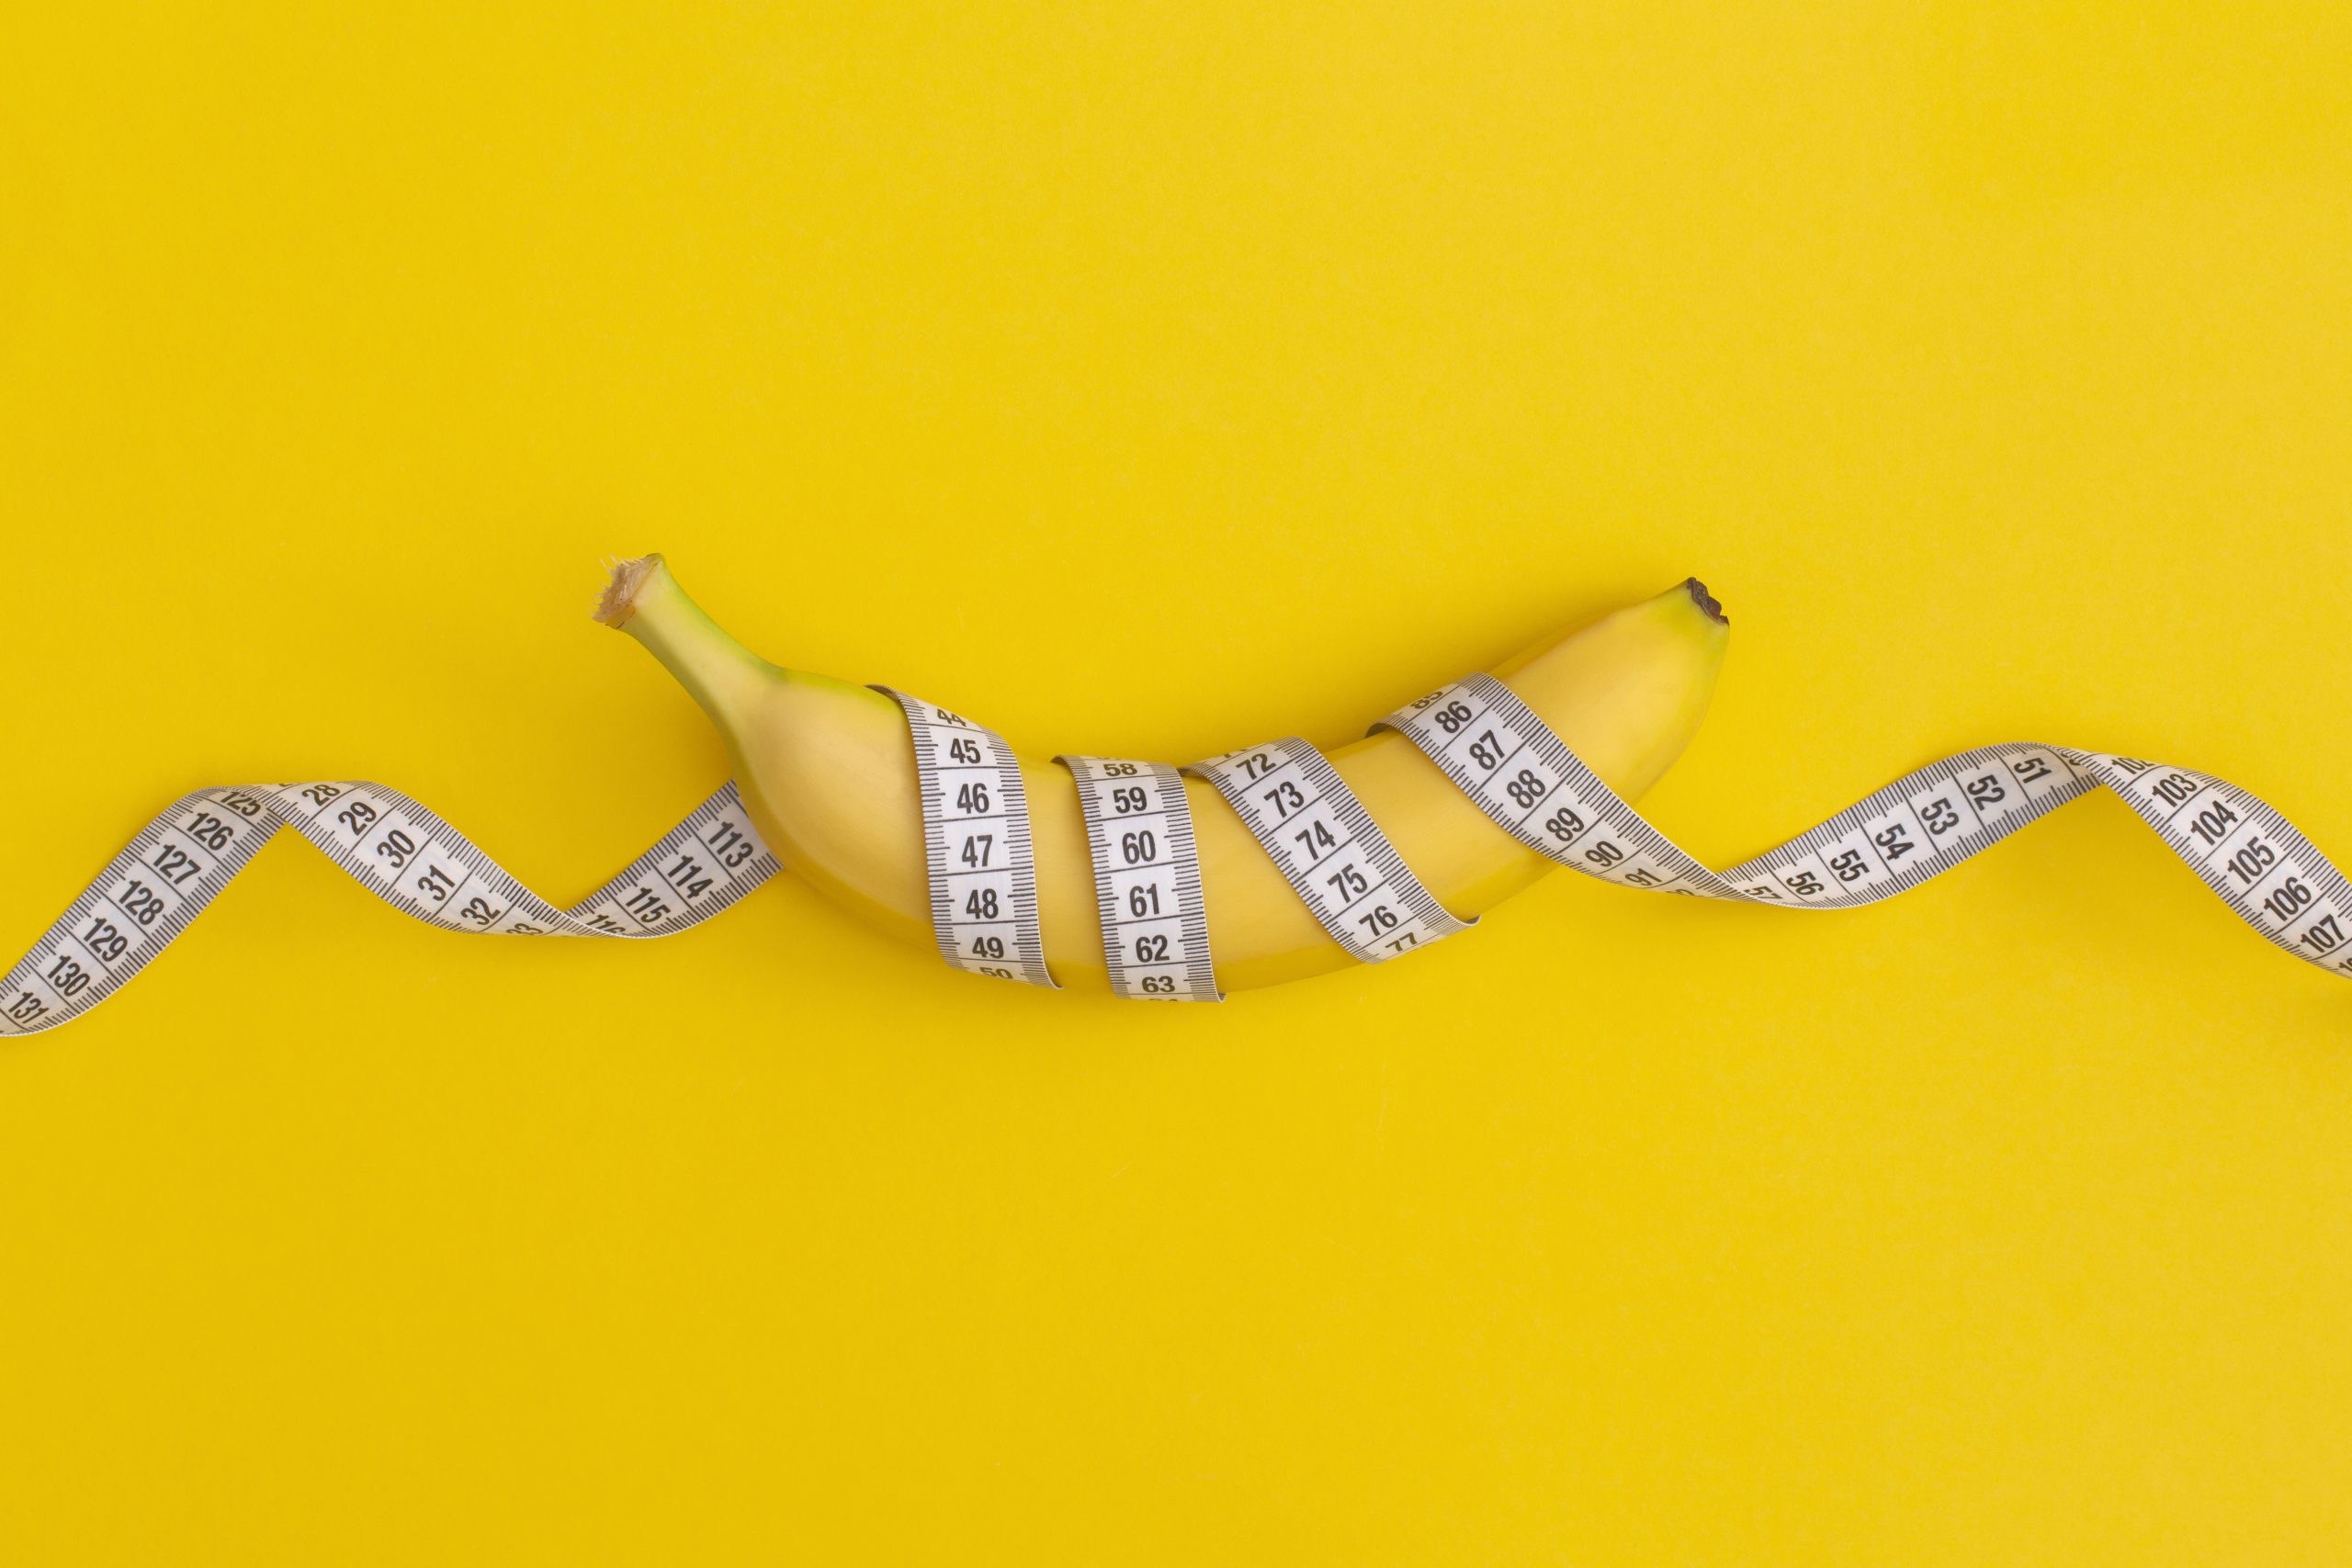 Measuring tape and banana on yellow background. Weight loss concept | FitMeals4U